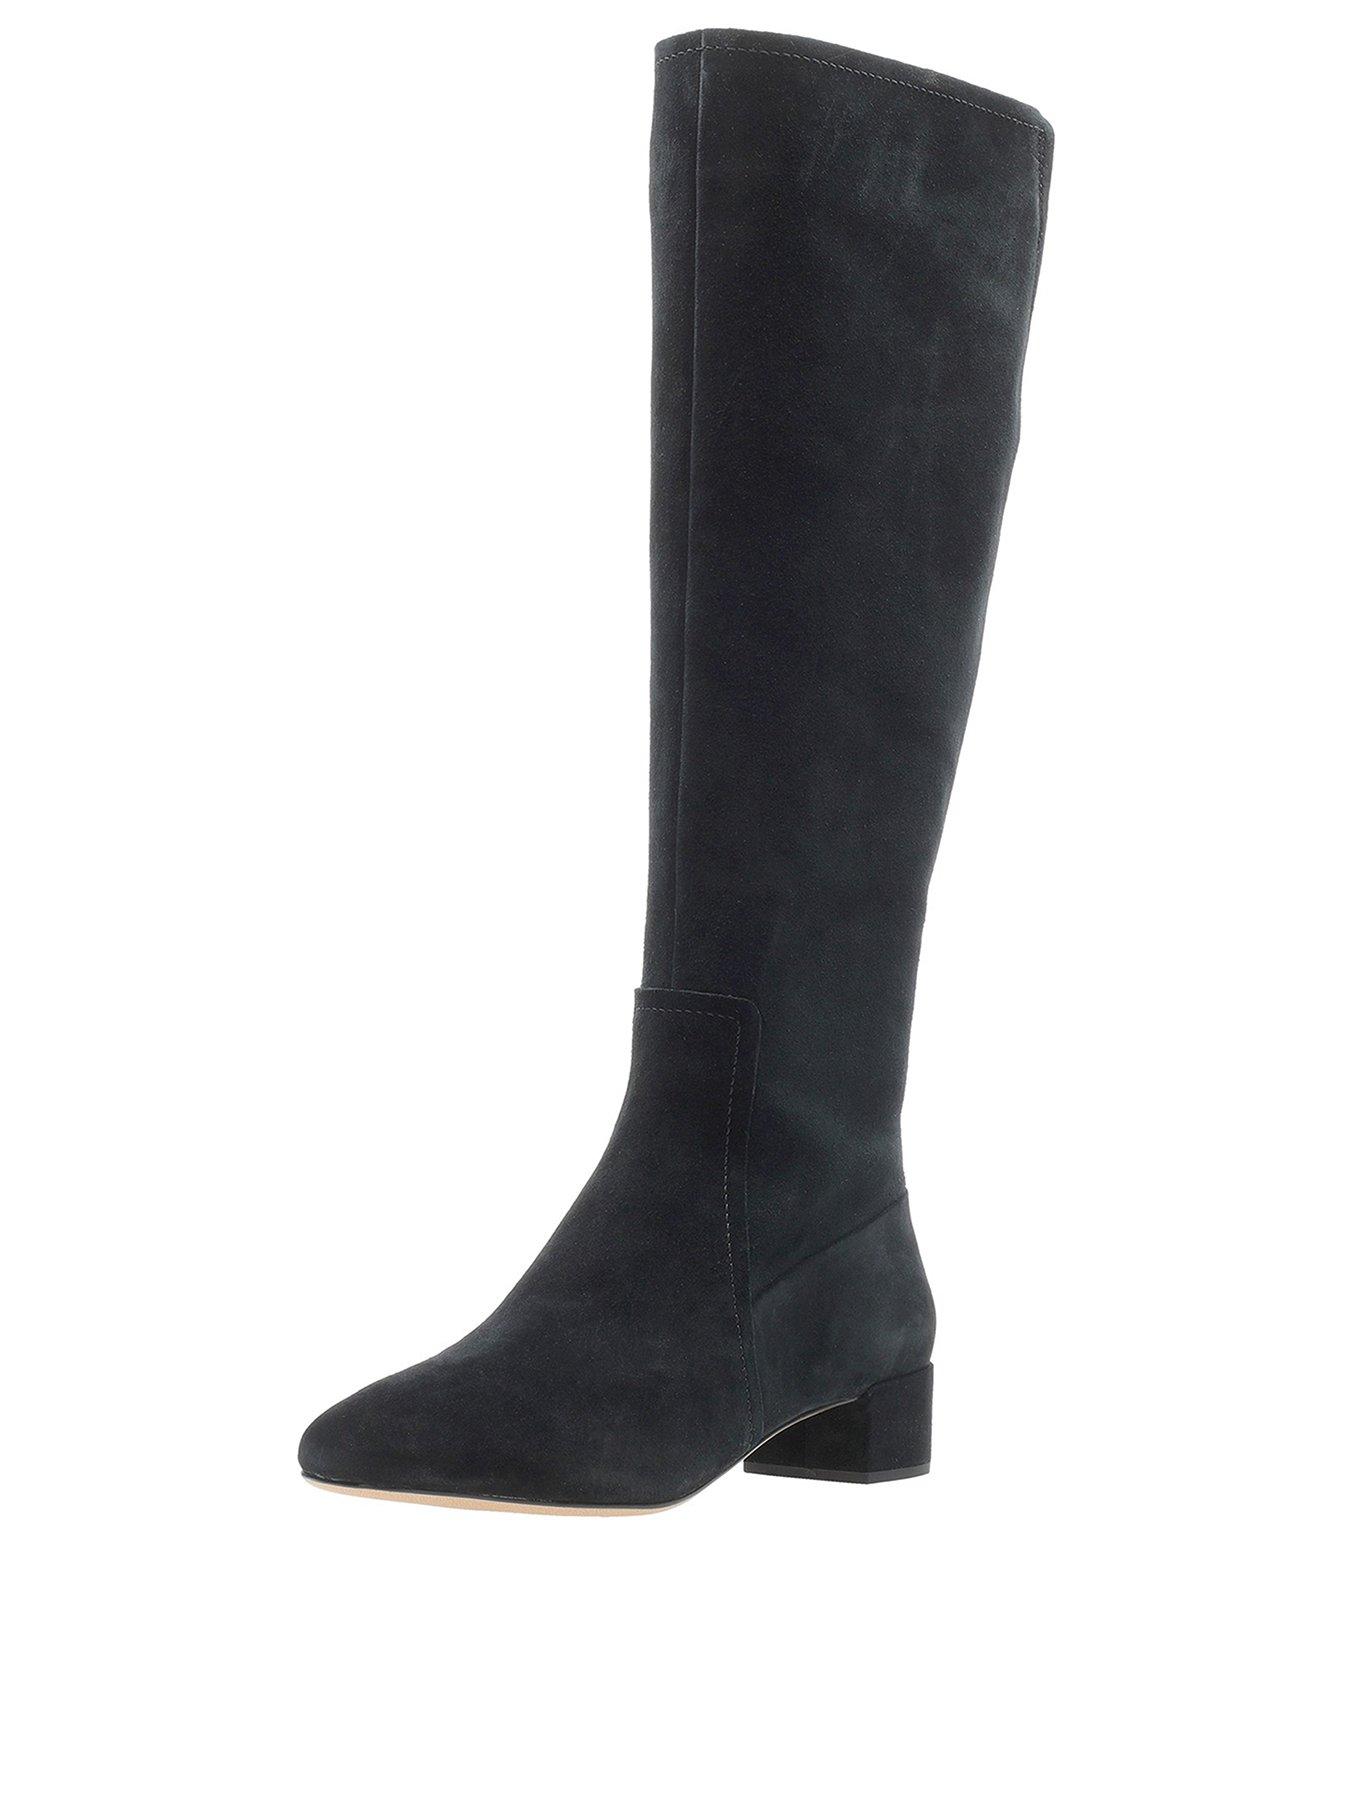 clarks black suede knee high boots